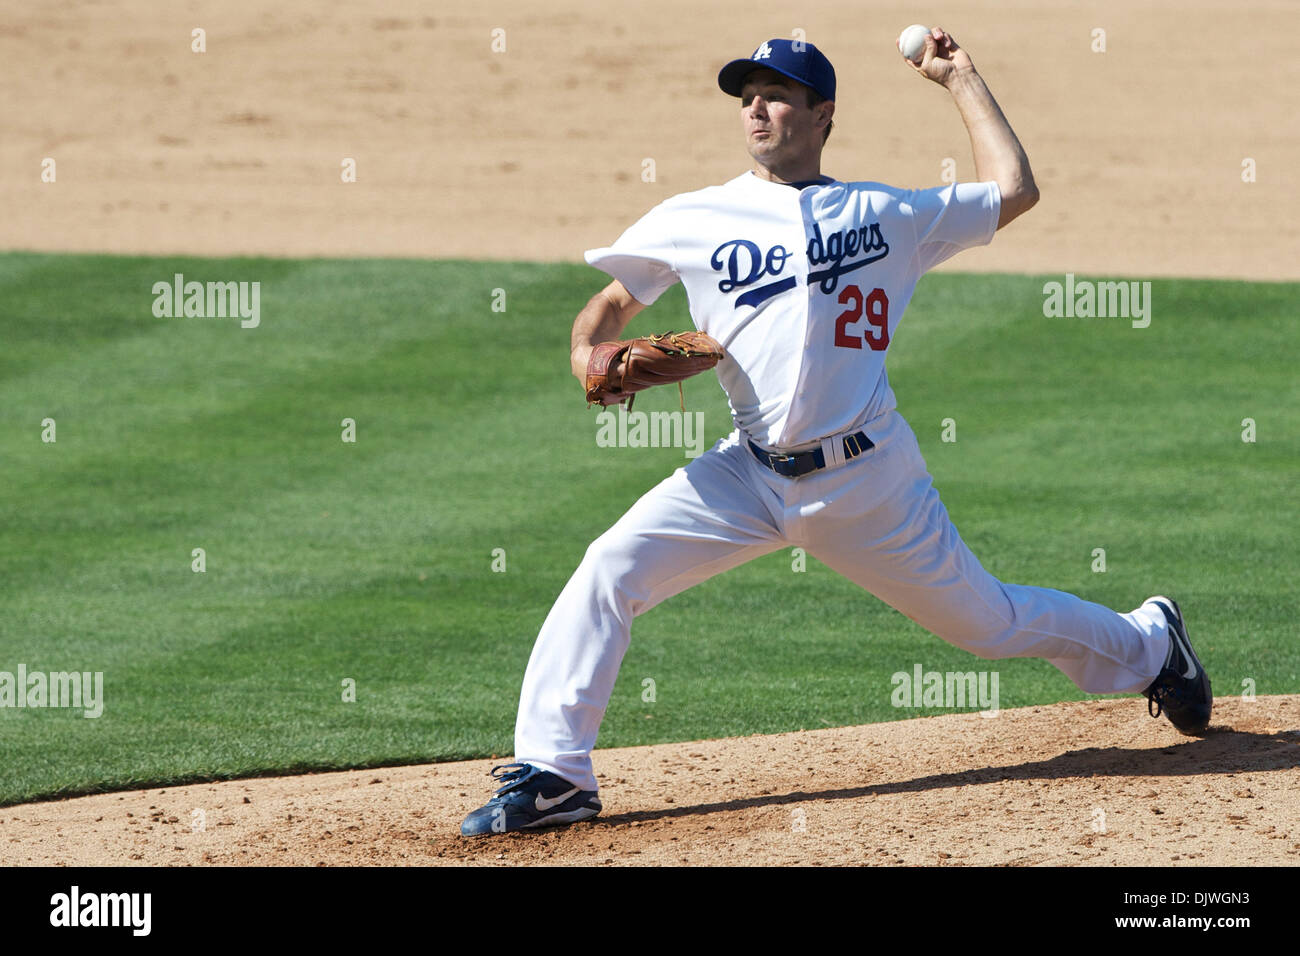 Oct. 3, 2010 - Los Angeles, California, United States of America - Los Angeles Dodgers starting pitcher Ted Lilly (29) would be the winning pitcher in the final game of the season for the Los Angeles Dodgers, as the Dodgers defeated the Arizona Diamondbacks 3-1 at Dodger Stadium. (Credit Image: © Tony Leon/Southcreek Global/ZUMApress.com) Stock Photo